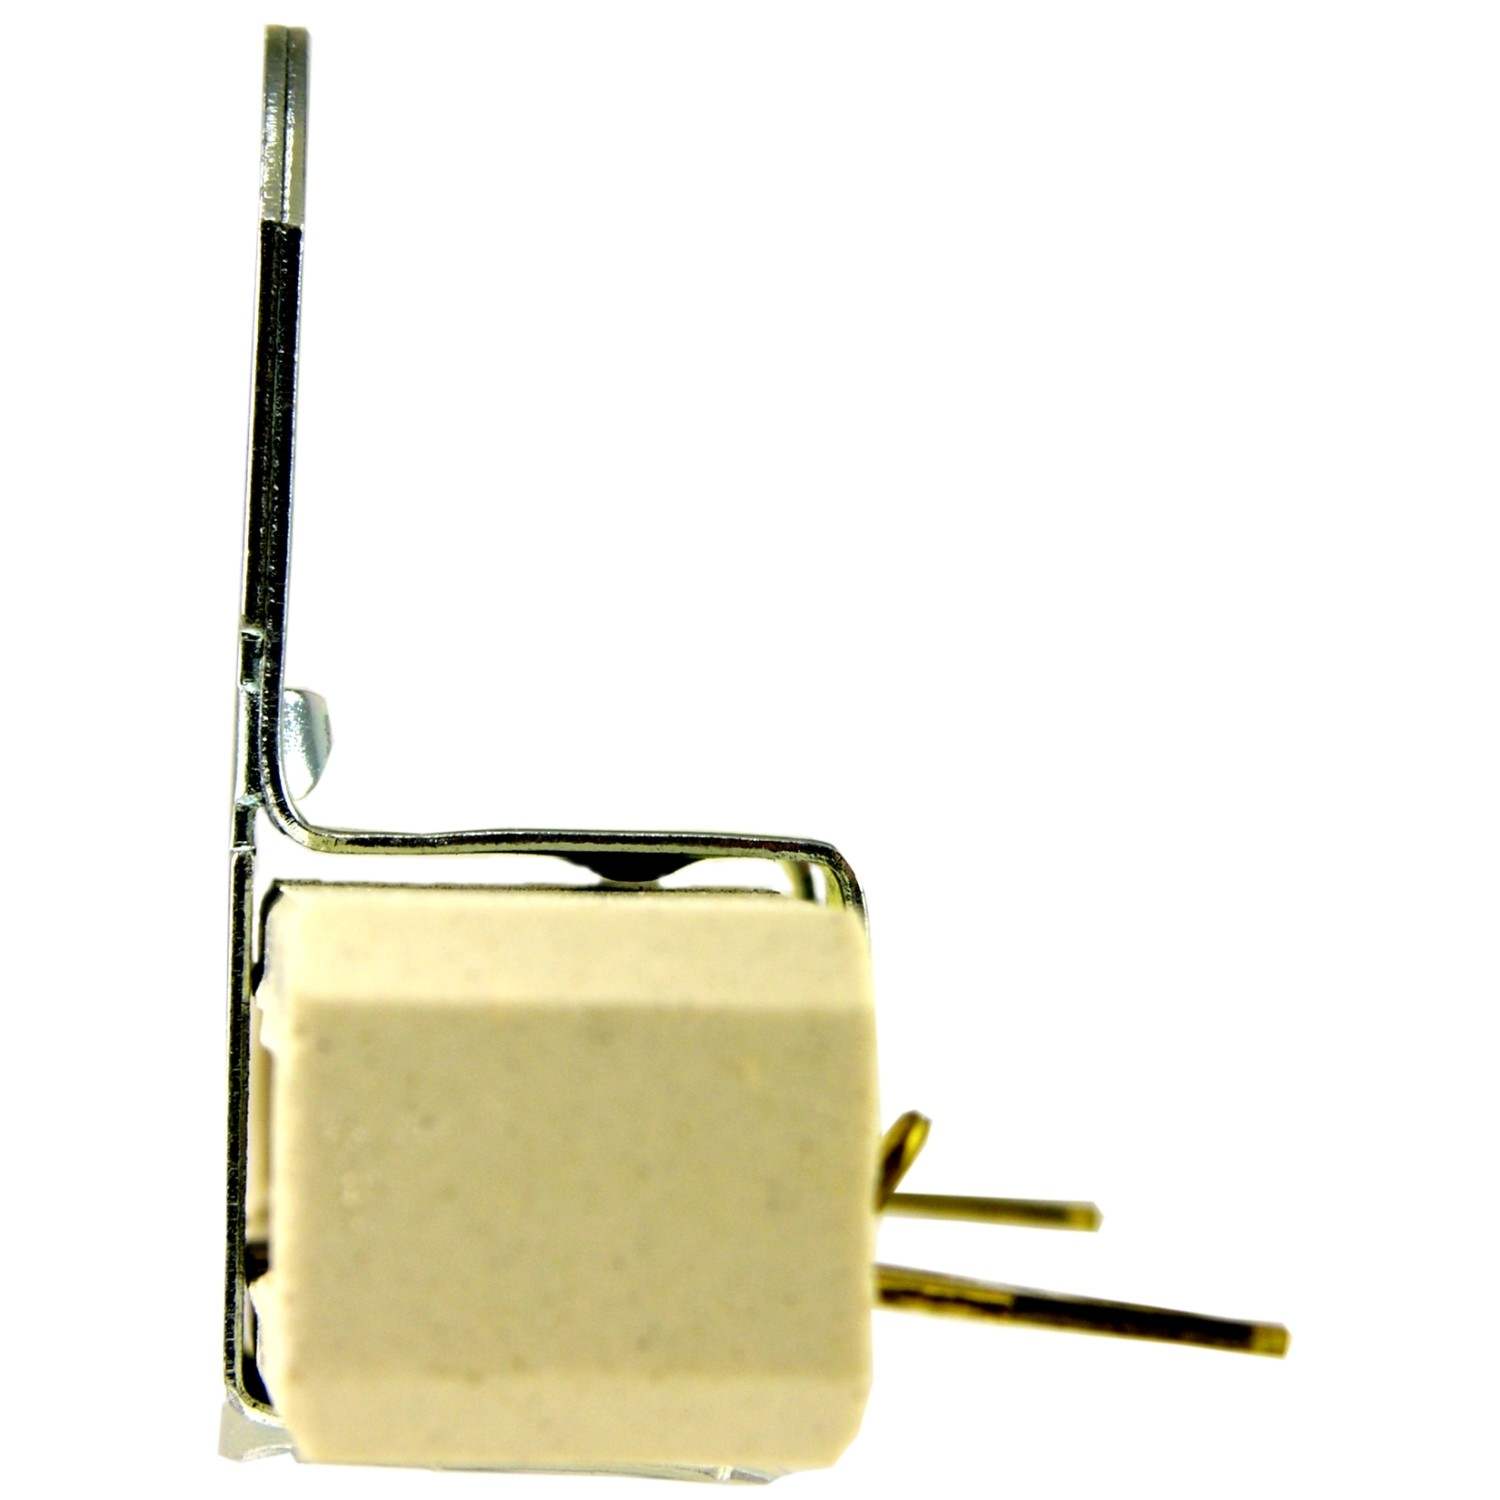 ACDELCO GOLD/PROFESSIONAL - Ballast Resistor - DCC F1104